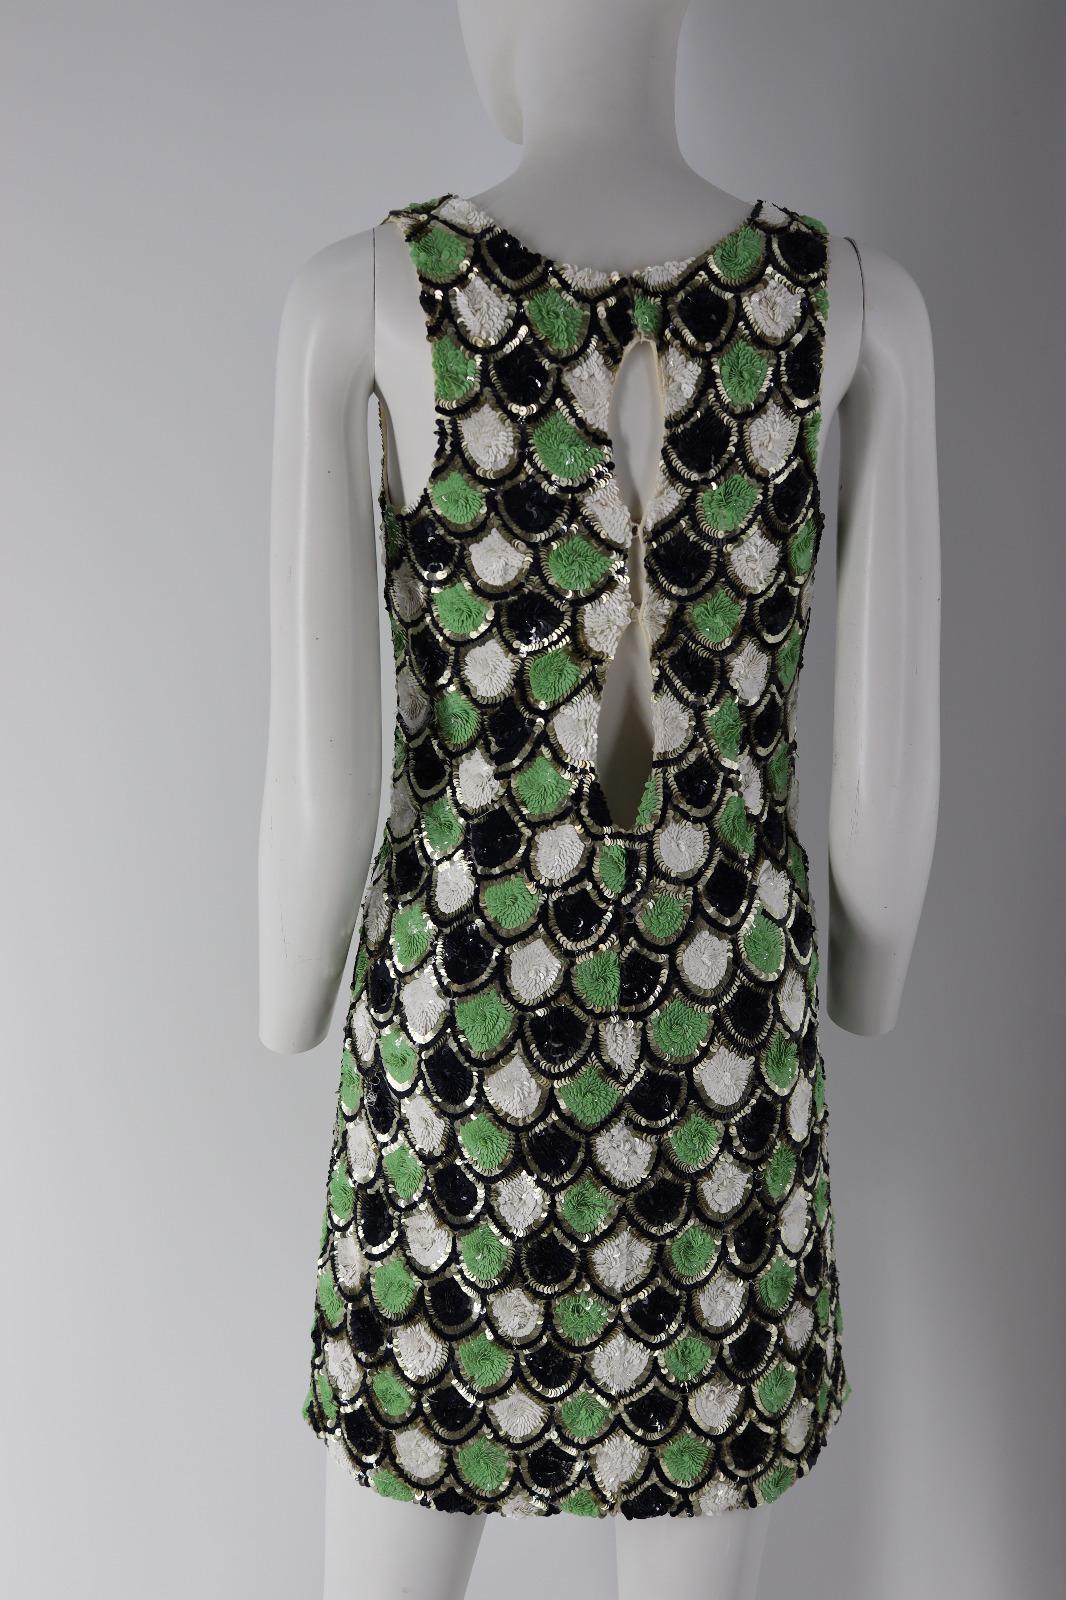 

Galliano Green Black And White Dress Sequins

- The materials used are : Sequins green, black and white.

- The mains colors on this are green, black and white.

- The back is slightly open.

- Excellent condition, shows some light signs of use